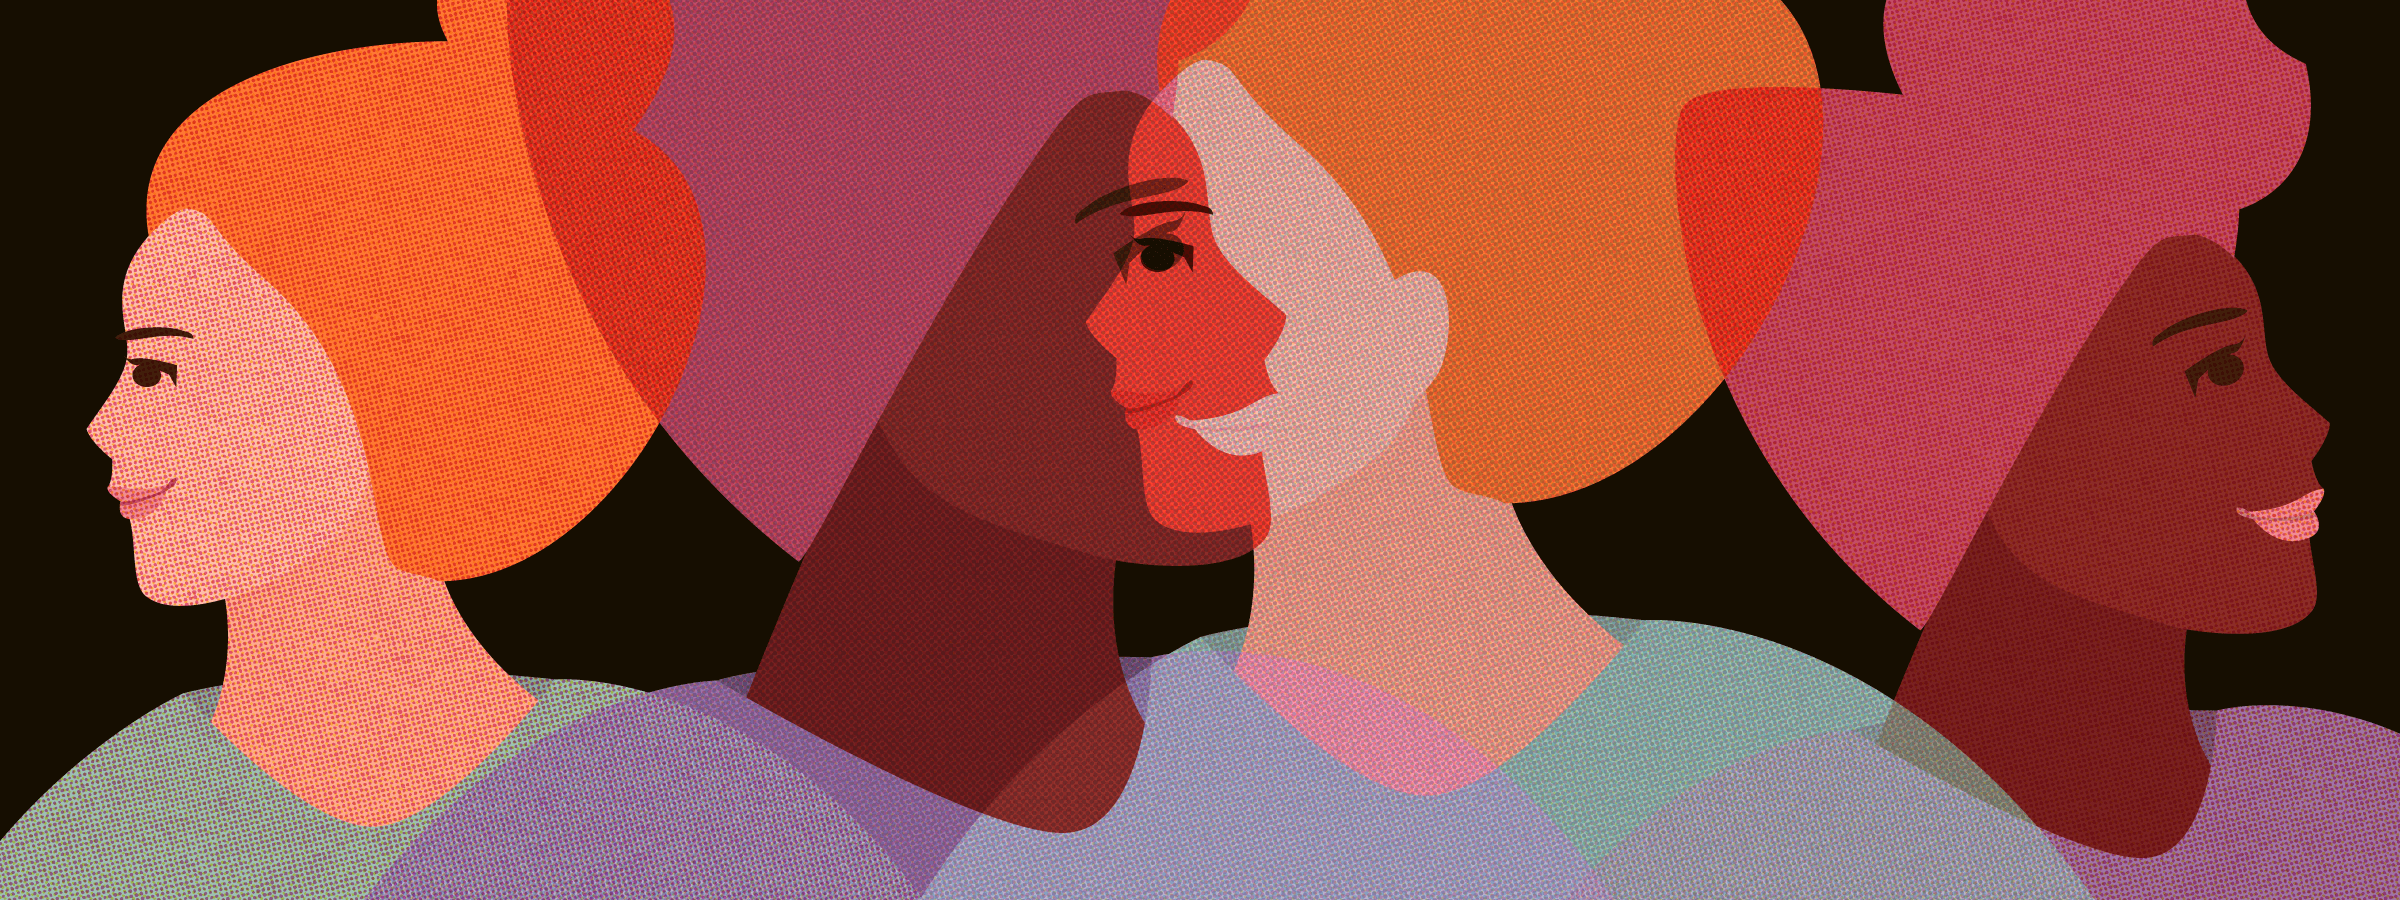 Abstract illustration of two women overlapping, one Black and one white.